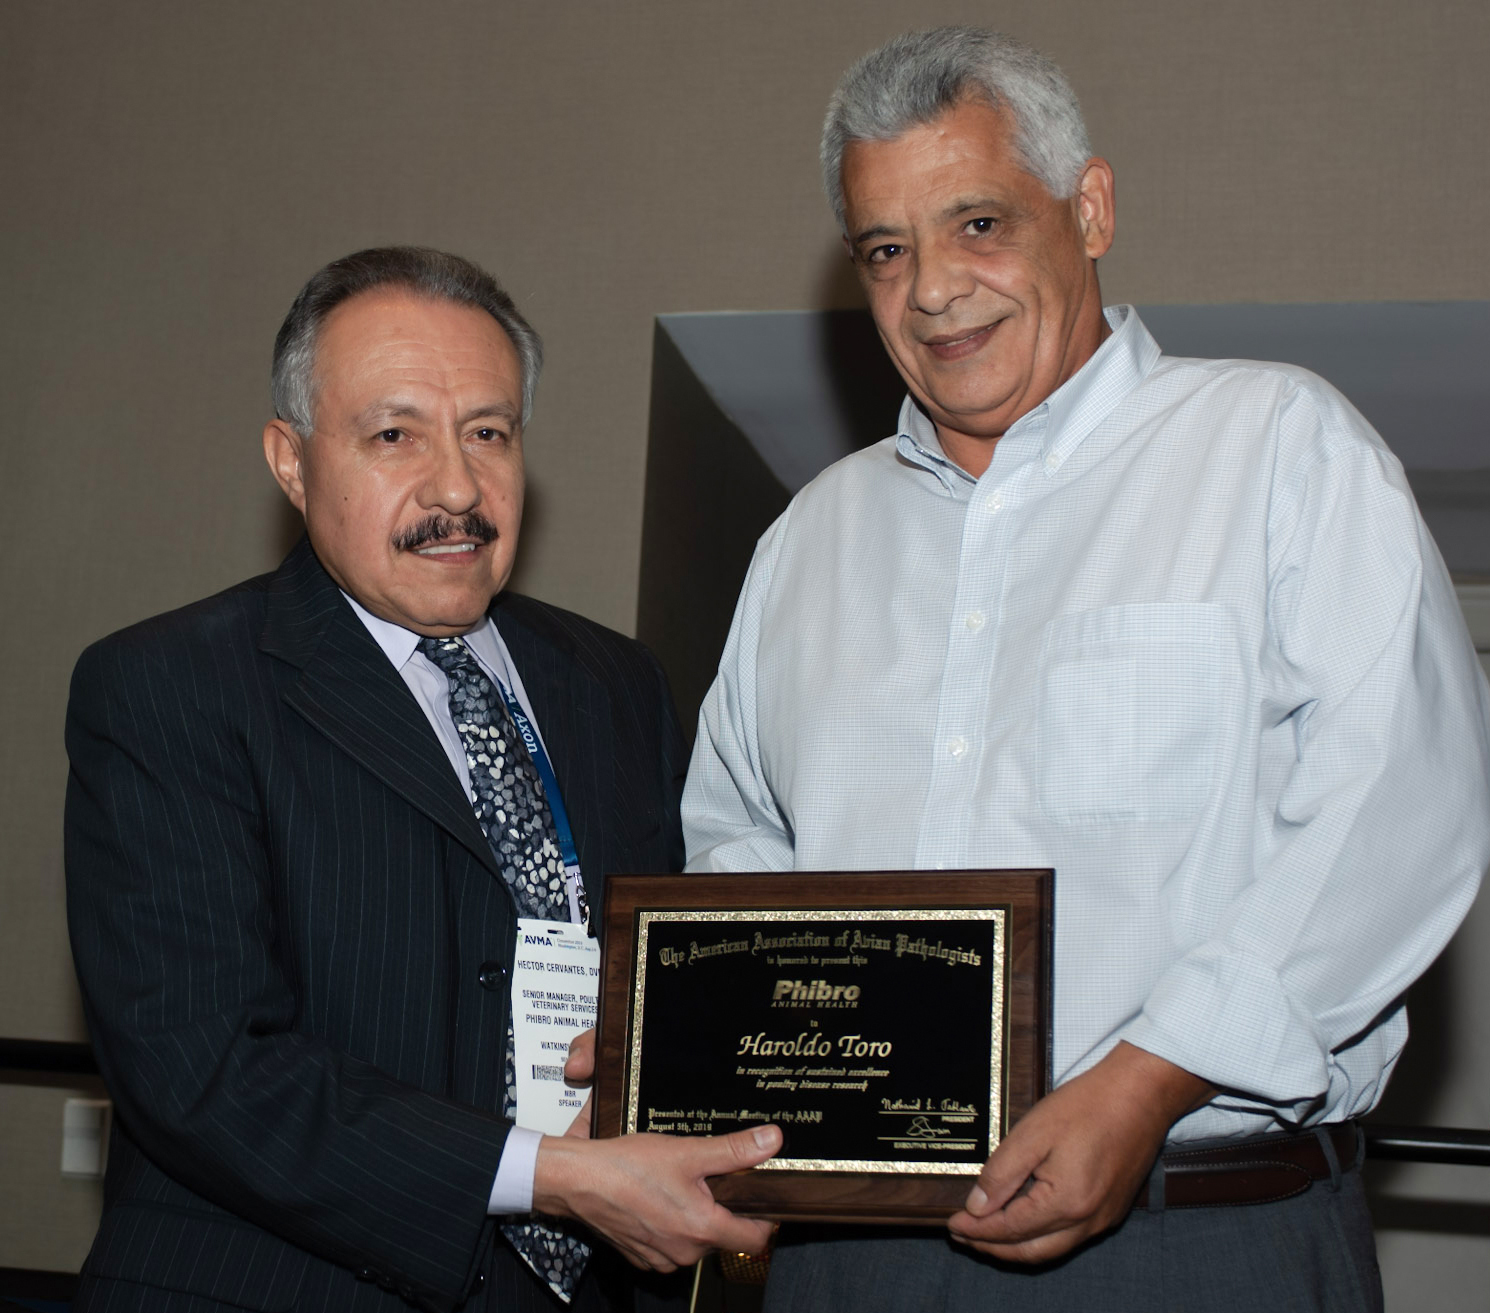 Dr. Haroldo Toro, right, Auburn University professor of avian diseases, receives the American Association of Avian Pathologists’ Phibro Animal Health Excellence in Poultry Research Award from Dr. Hector Cervantes, AAAP past president and Phibro representative.